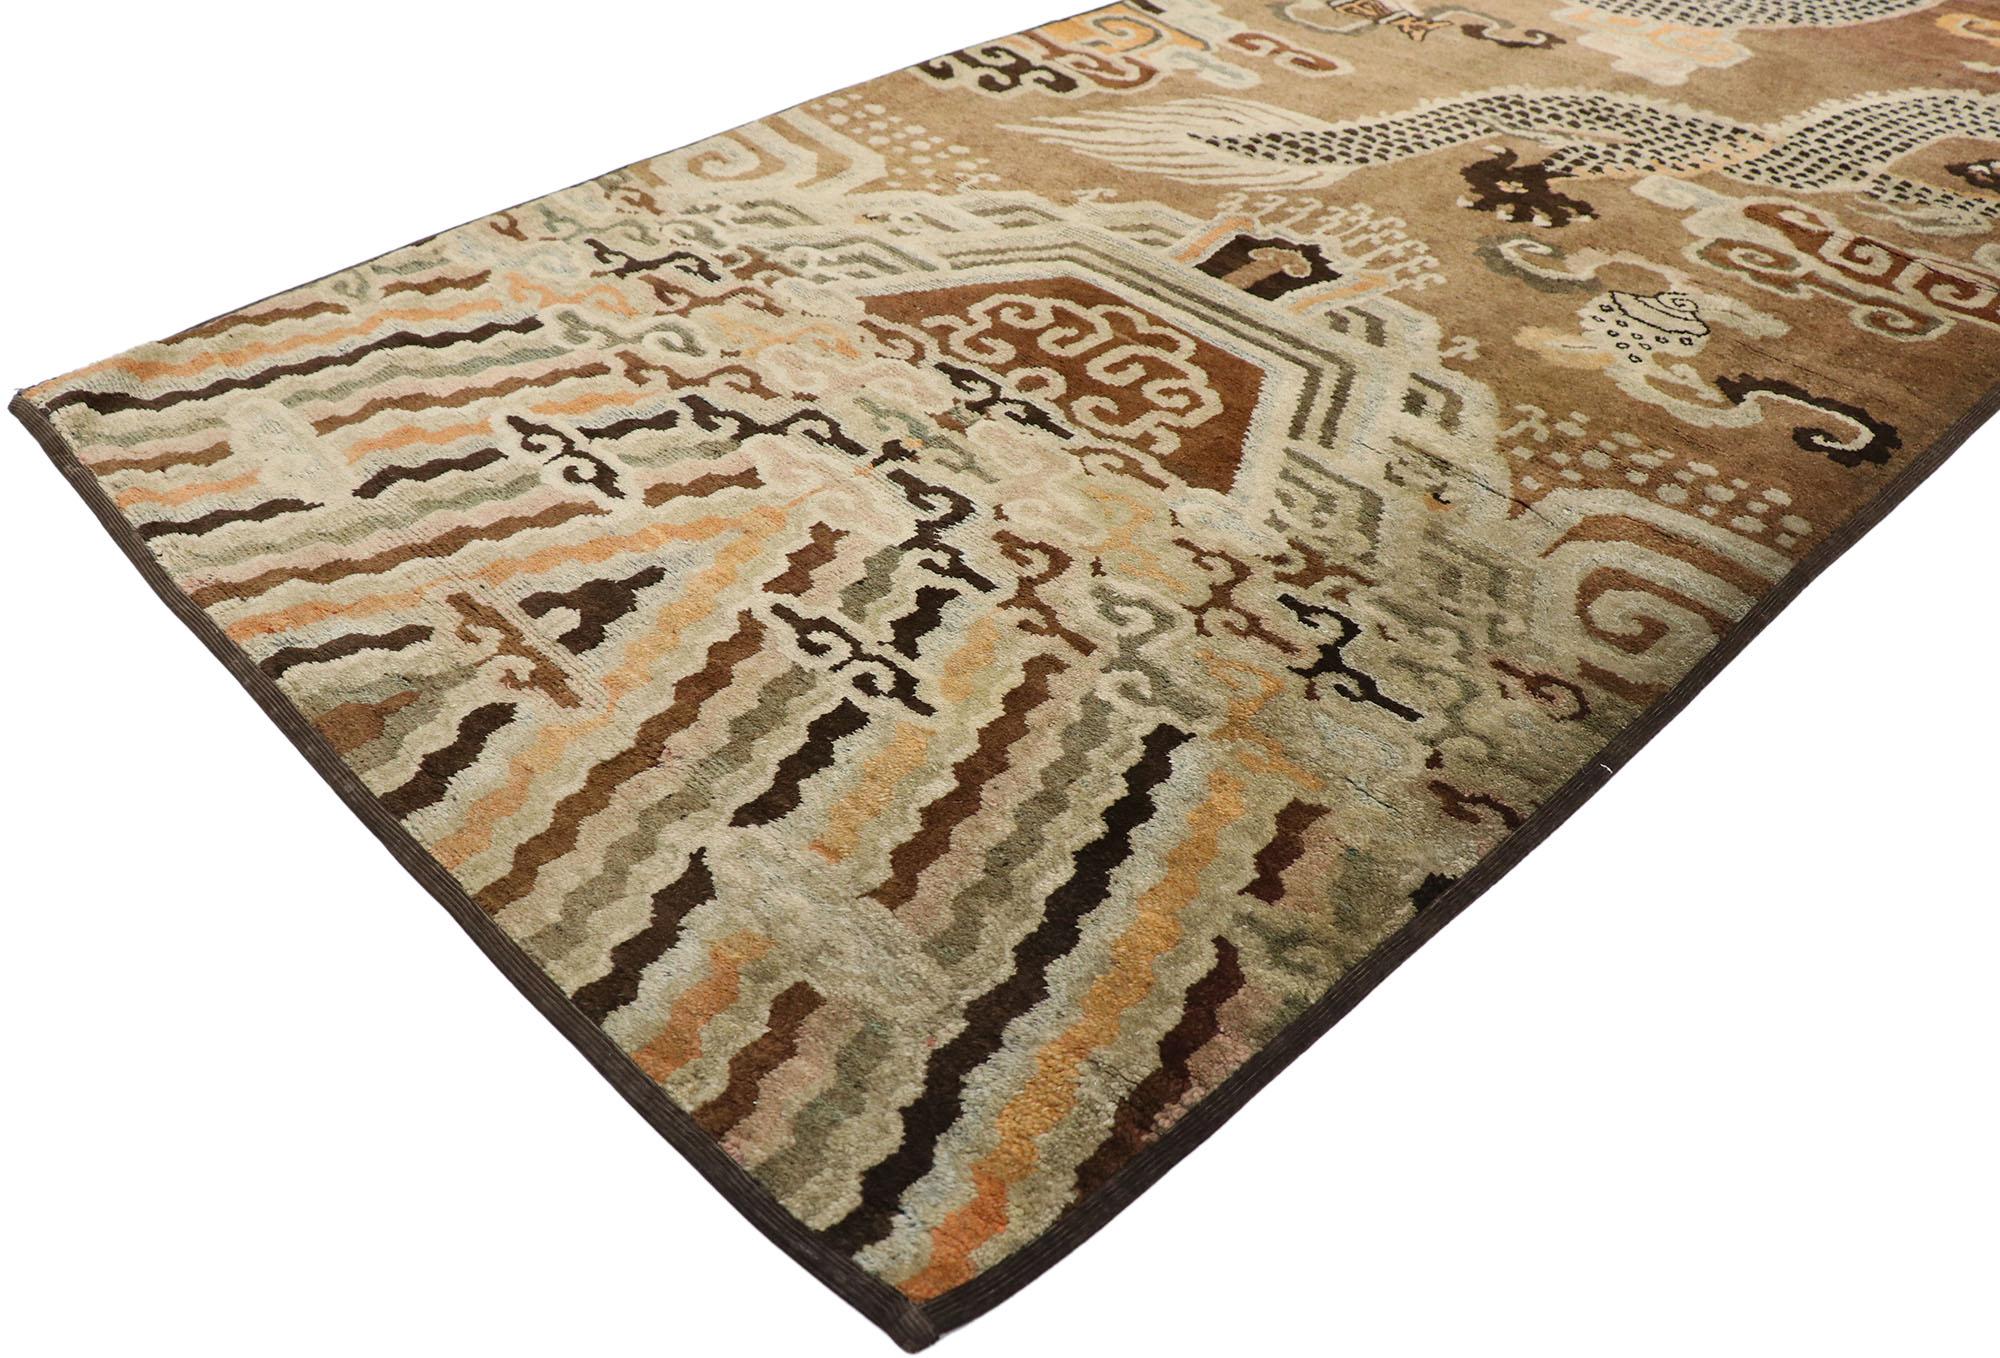 53479 Antique Chinese Ningxia Pillar Rug 03'05 x 14'01.
The interplay between the piece’s various decorative elements gives the composition a great deal of movement and visual interest while also creating a strong sense of story in this hand-knotted